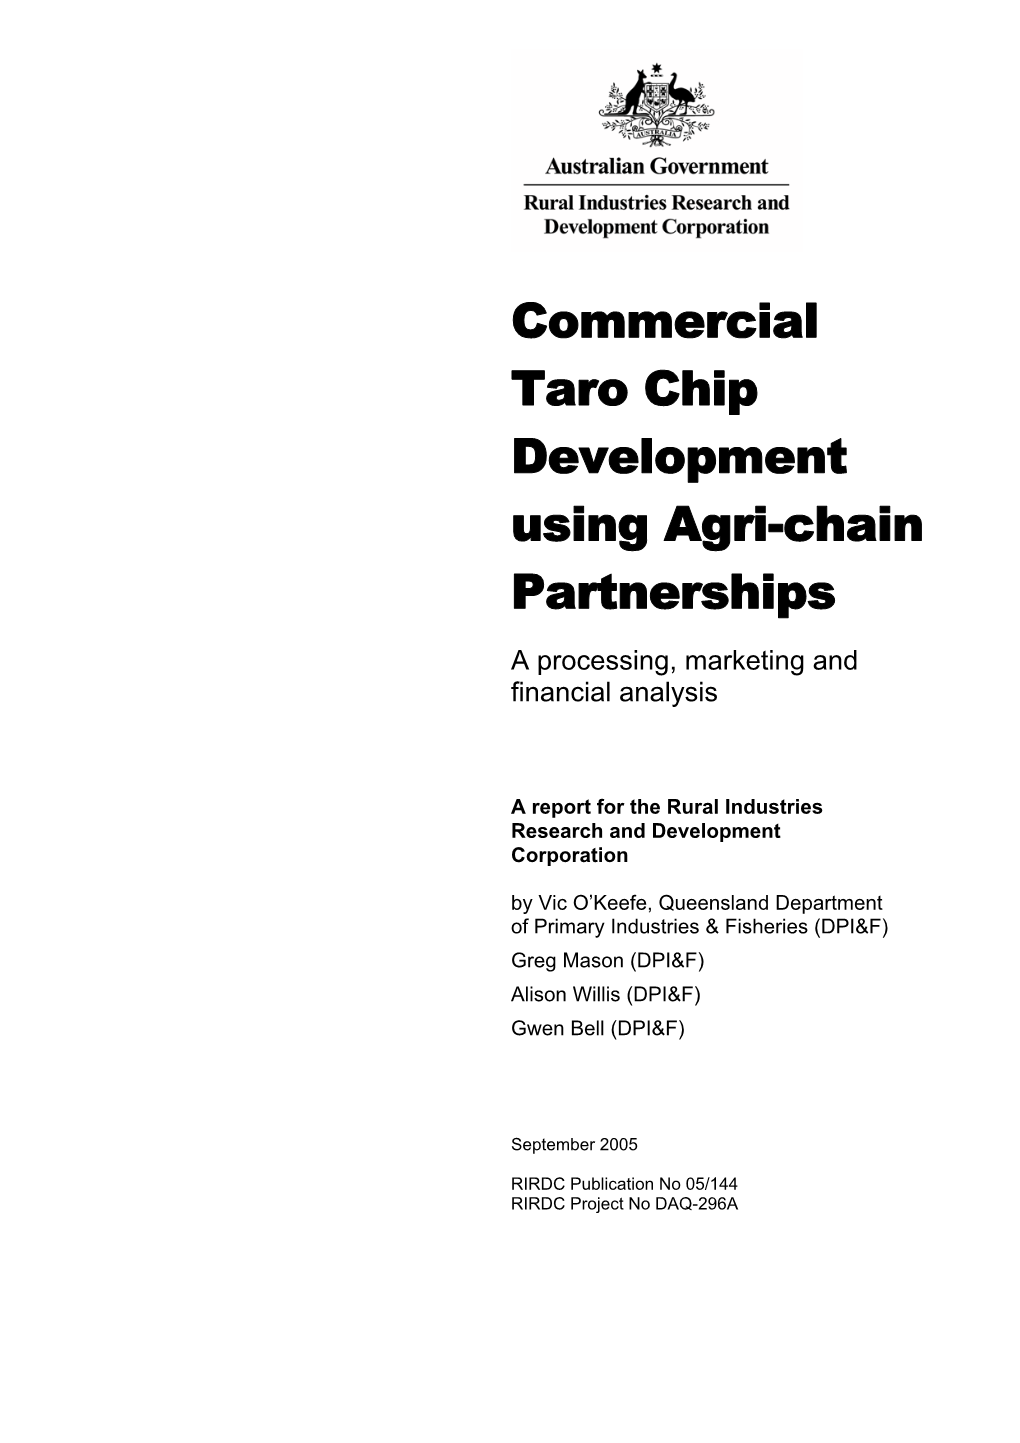 Commercial Taro Chip Development Using Agri-Chain Partnerships a Processing, Marketing and Financial Analysis